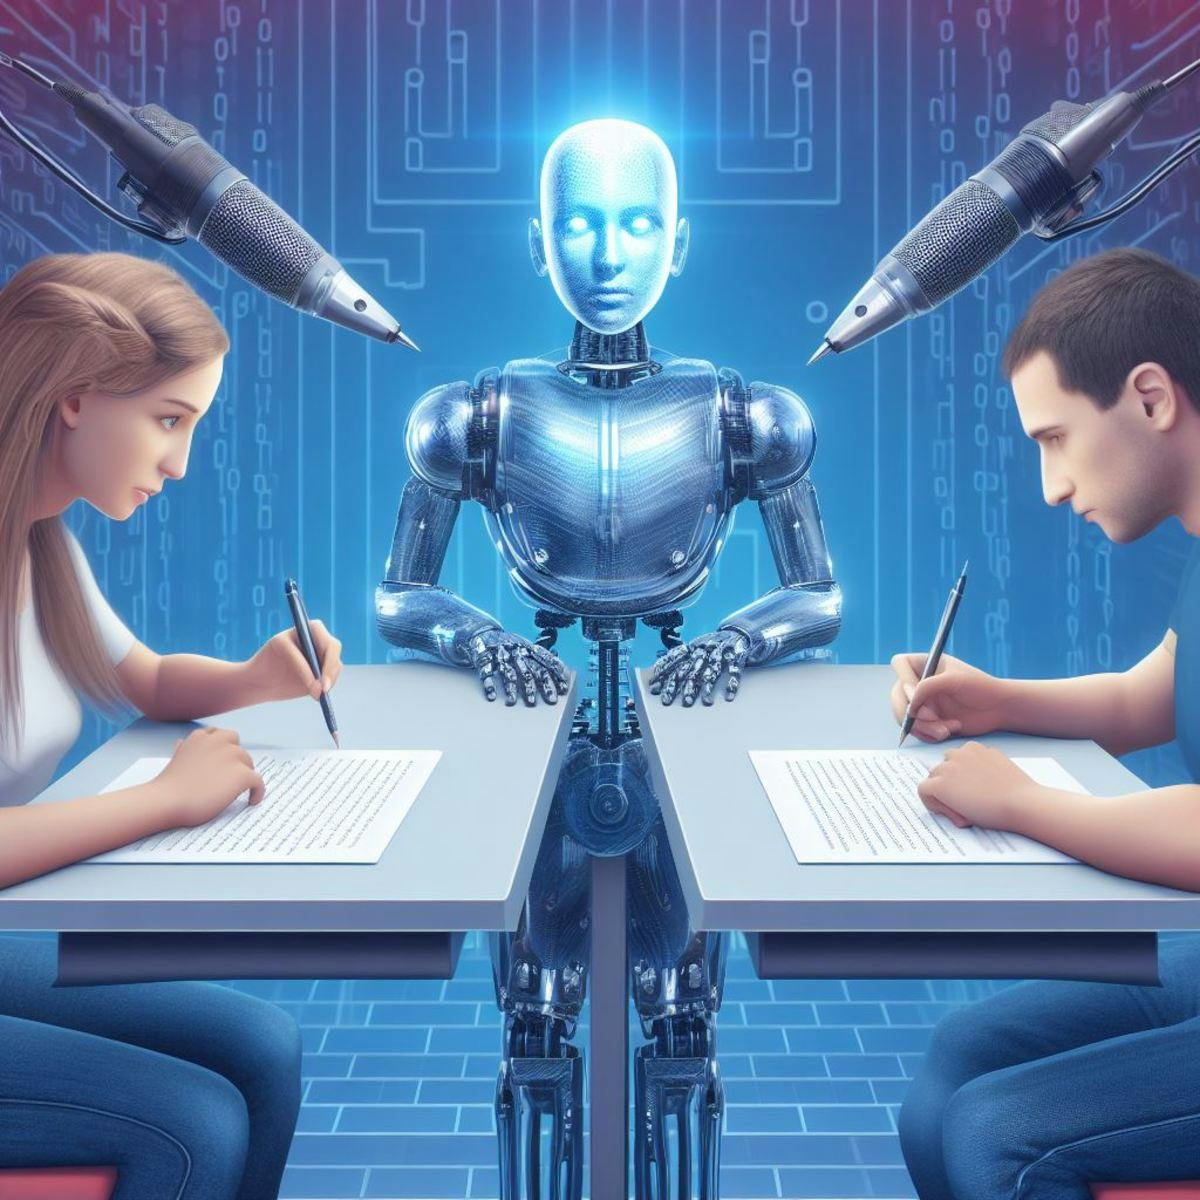  A human writer and an AI writer competing in a writing contest, with the AI writer having an edge over the human writer